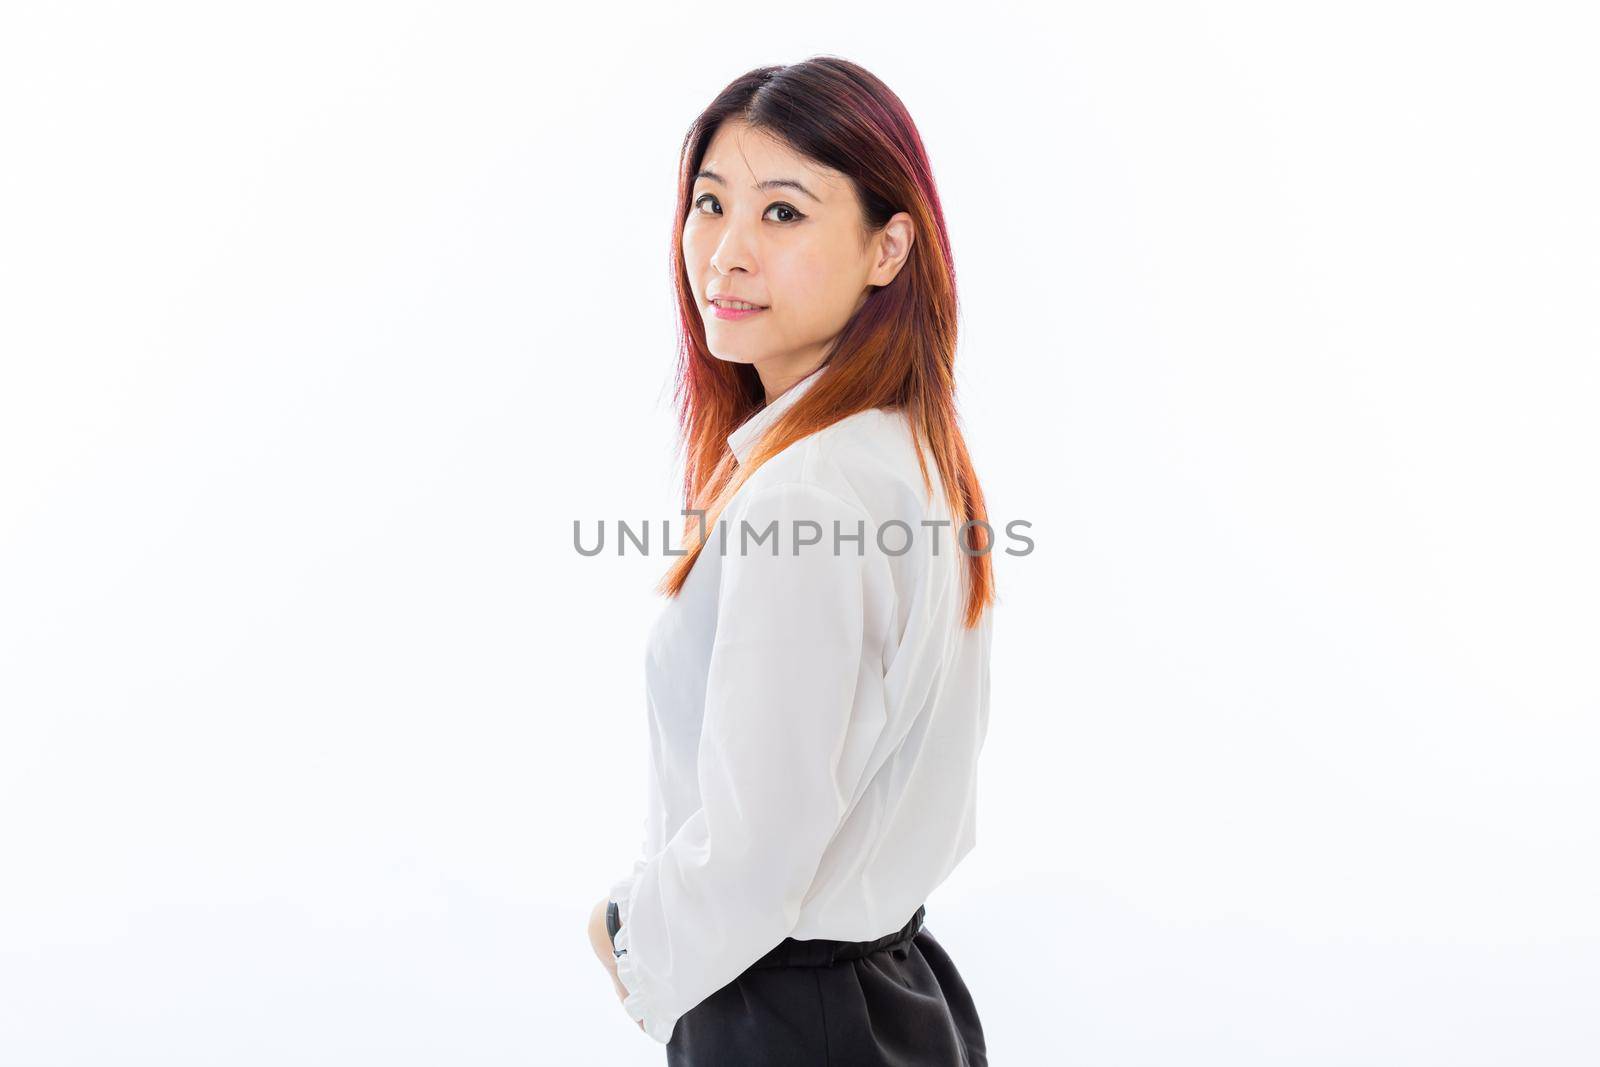 Asian woman in casual business attire by imagesbykenny